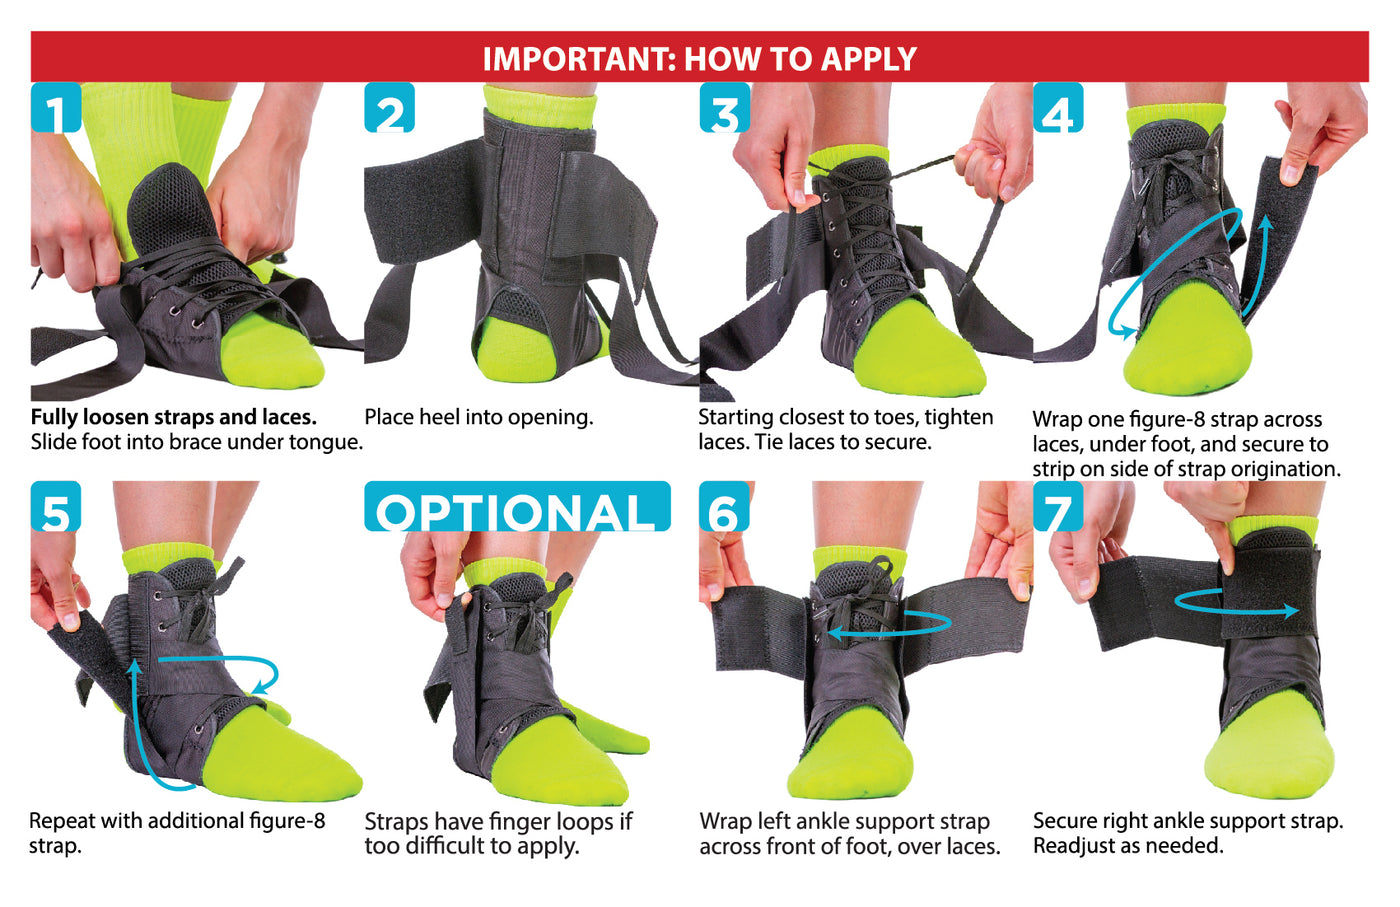 The instruction sheet for the lace up ankle brace is simple, slip the brace on, tie the laces, and wrap figure-8 straps